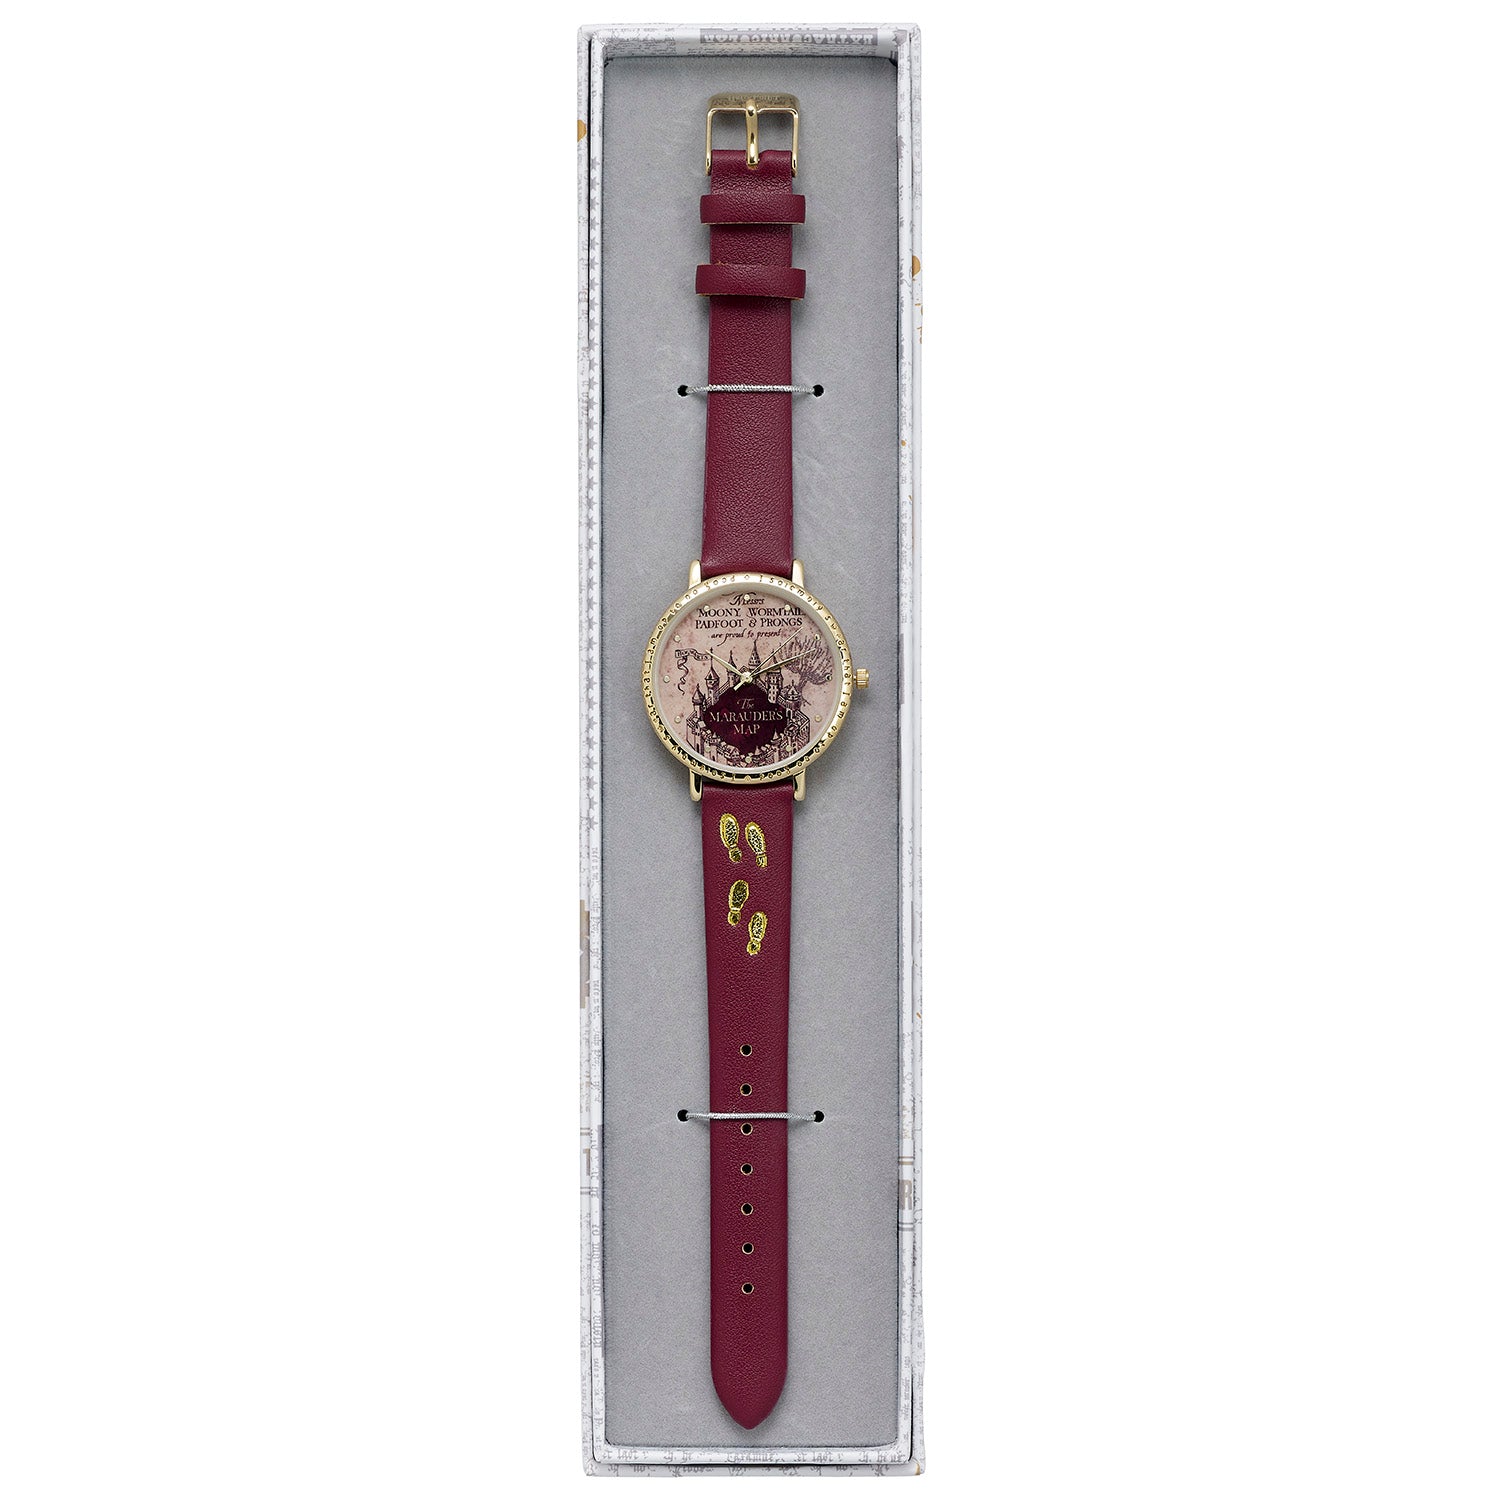 Harry Potter Hogwarts Castle Watch - Official Licensed Product - Tracked Shipping